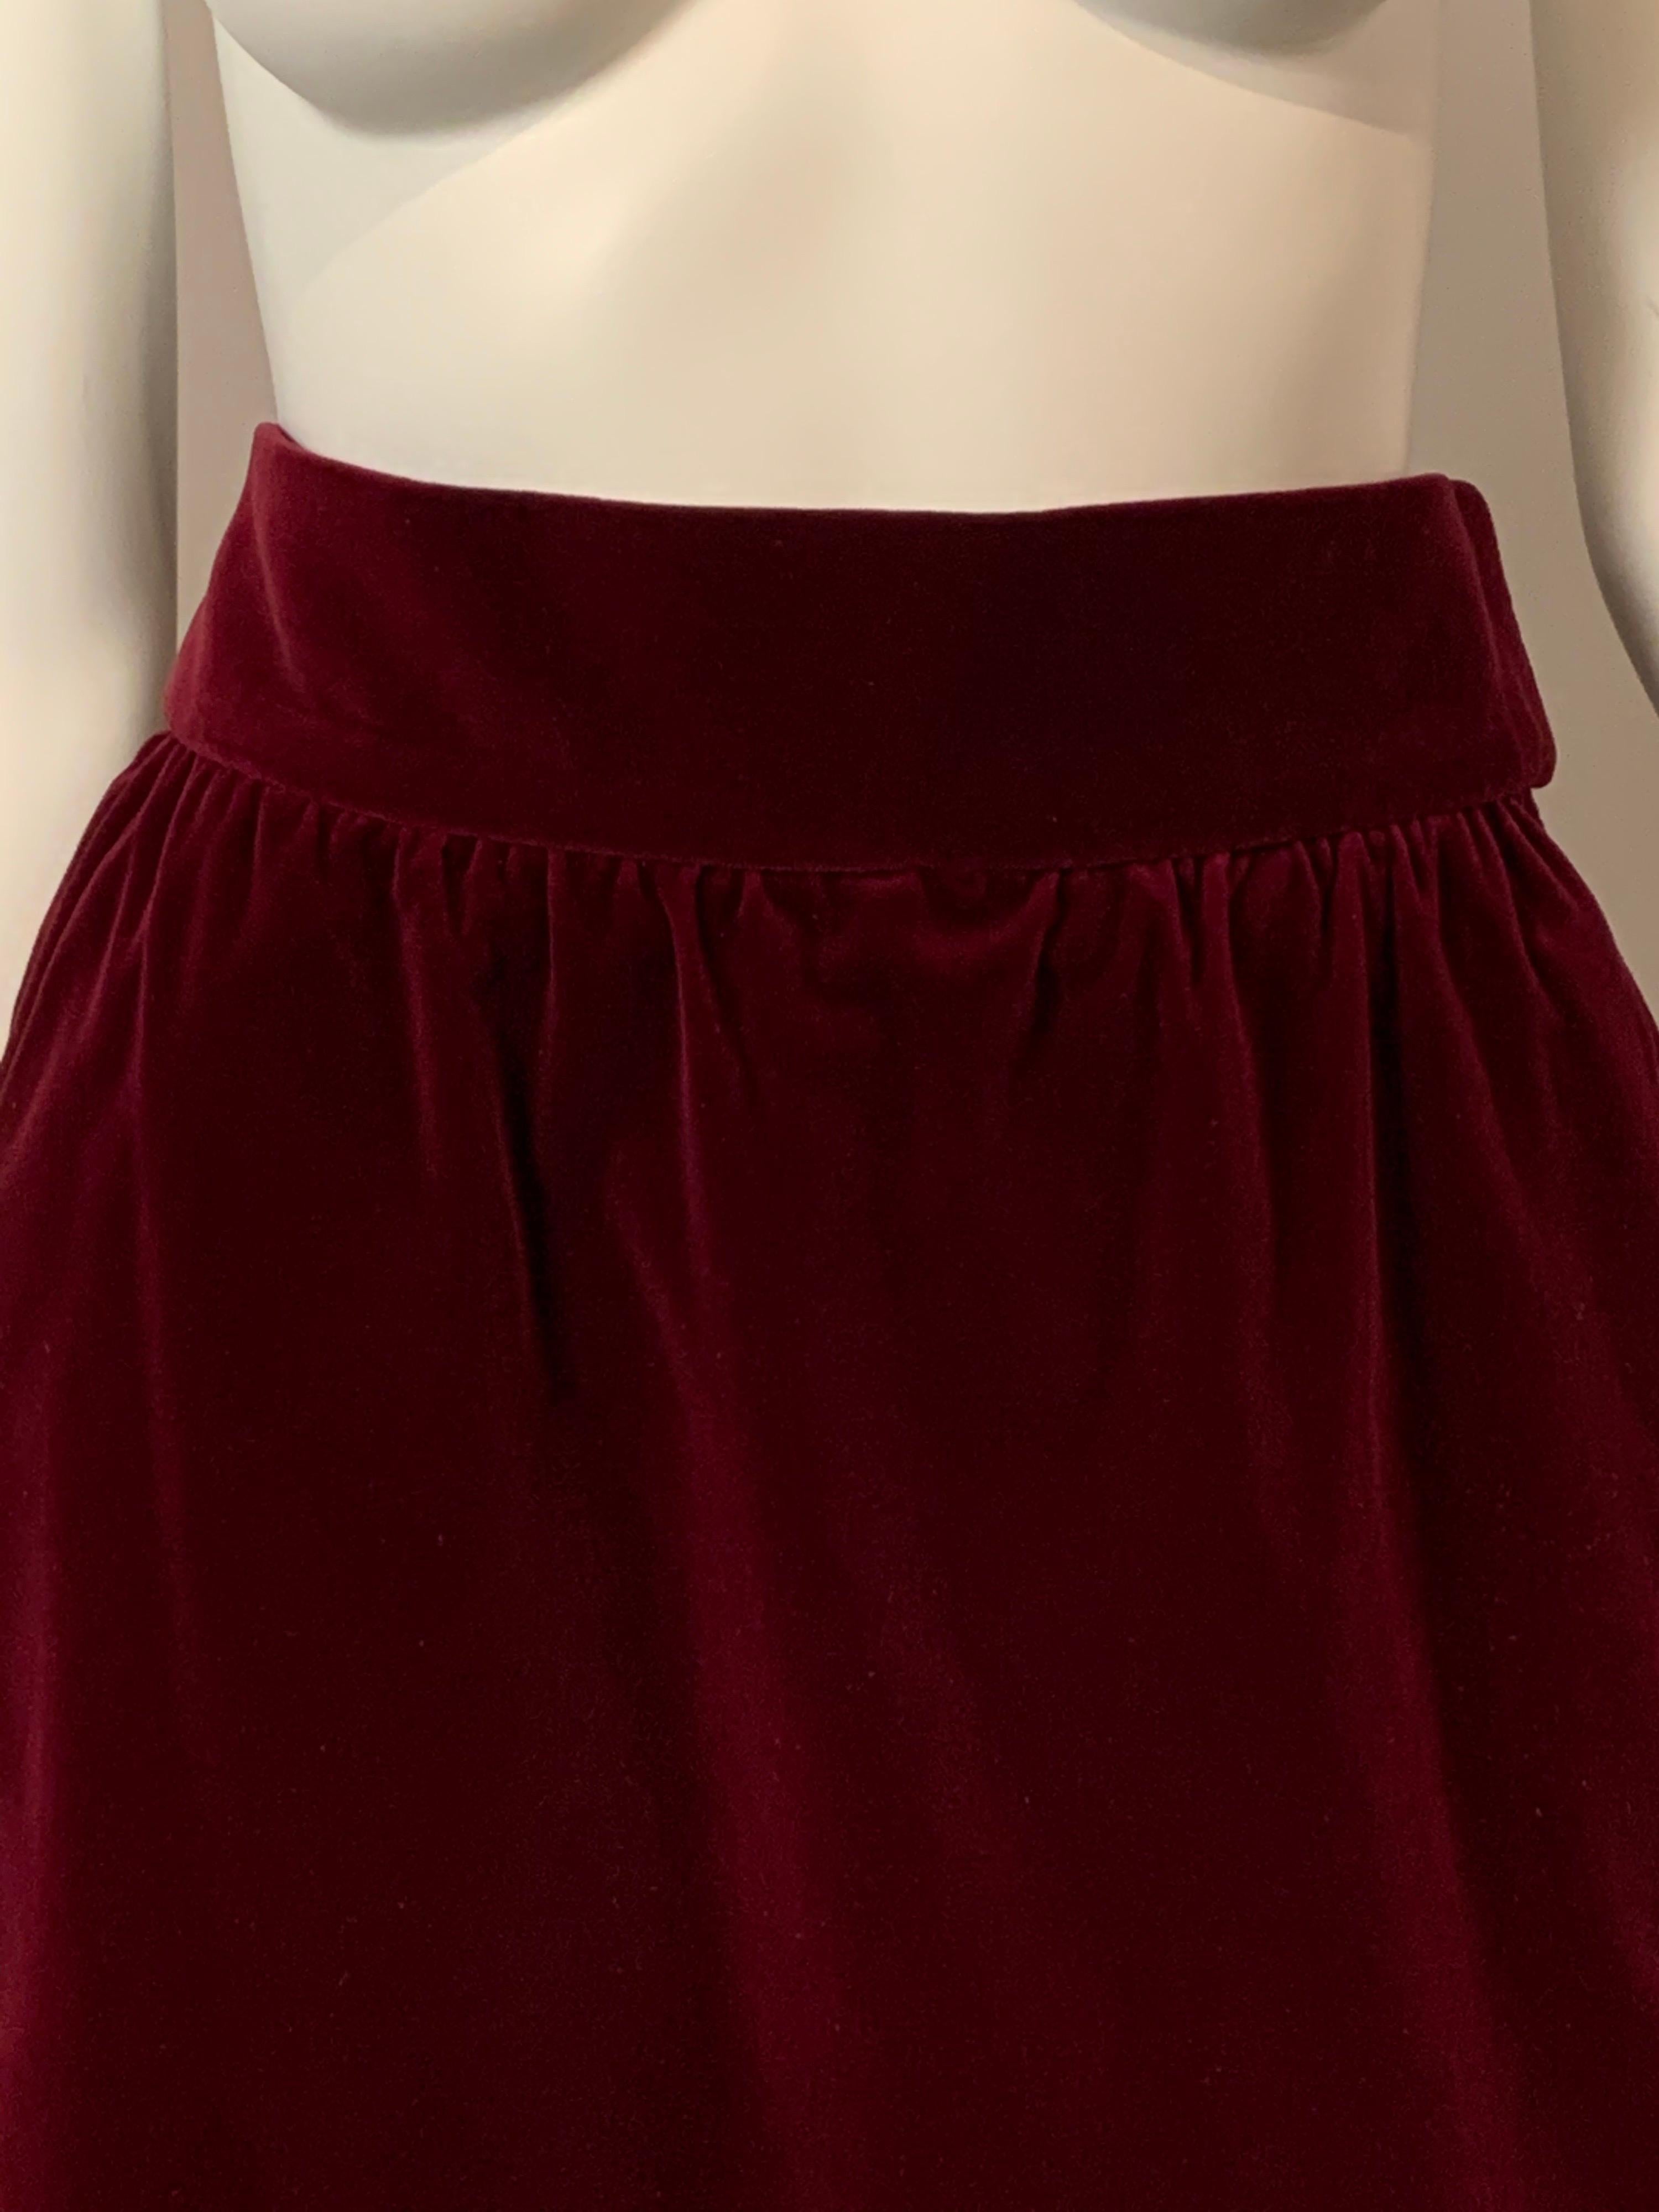 Yves Saint Laurent chose a beautiful and rich claret colored velvet for this straight skirt with a slightly gathered waist, two side pockets, a left side zipper and a high waistband.  It is fully lined, marked a size 42 and is in excellent